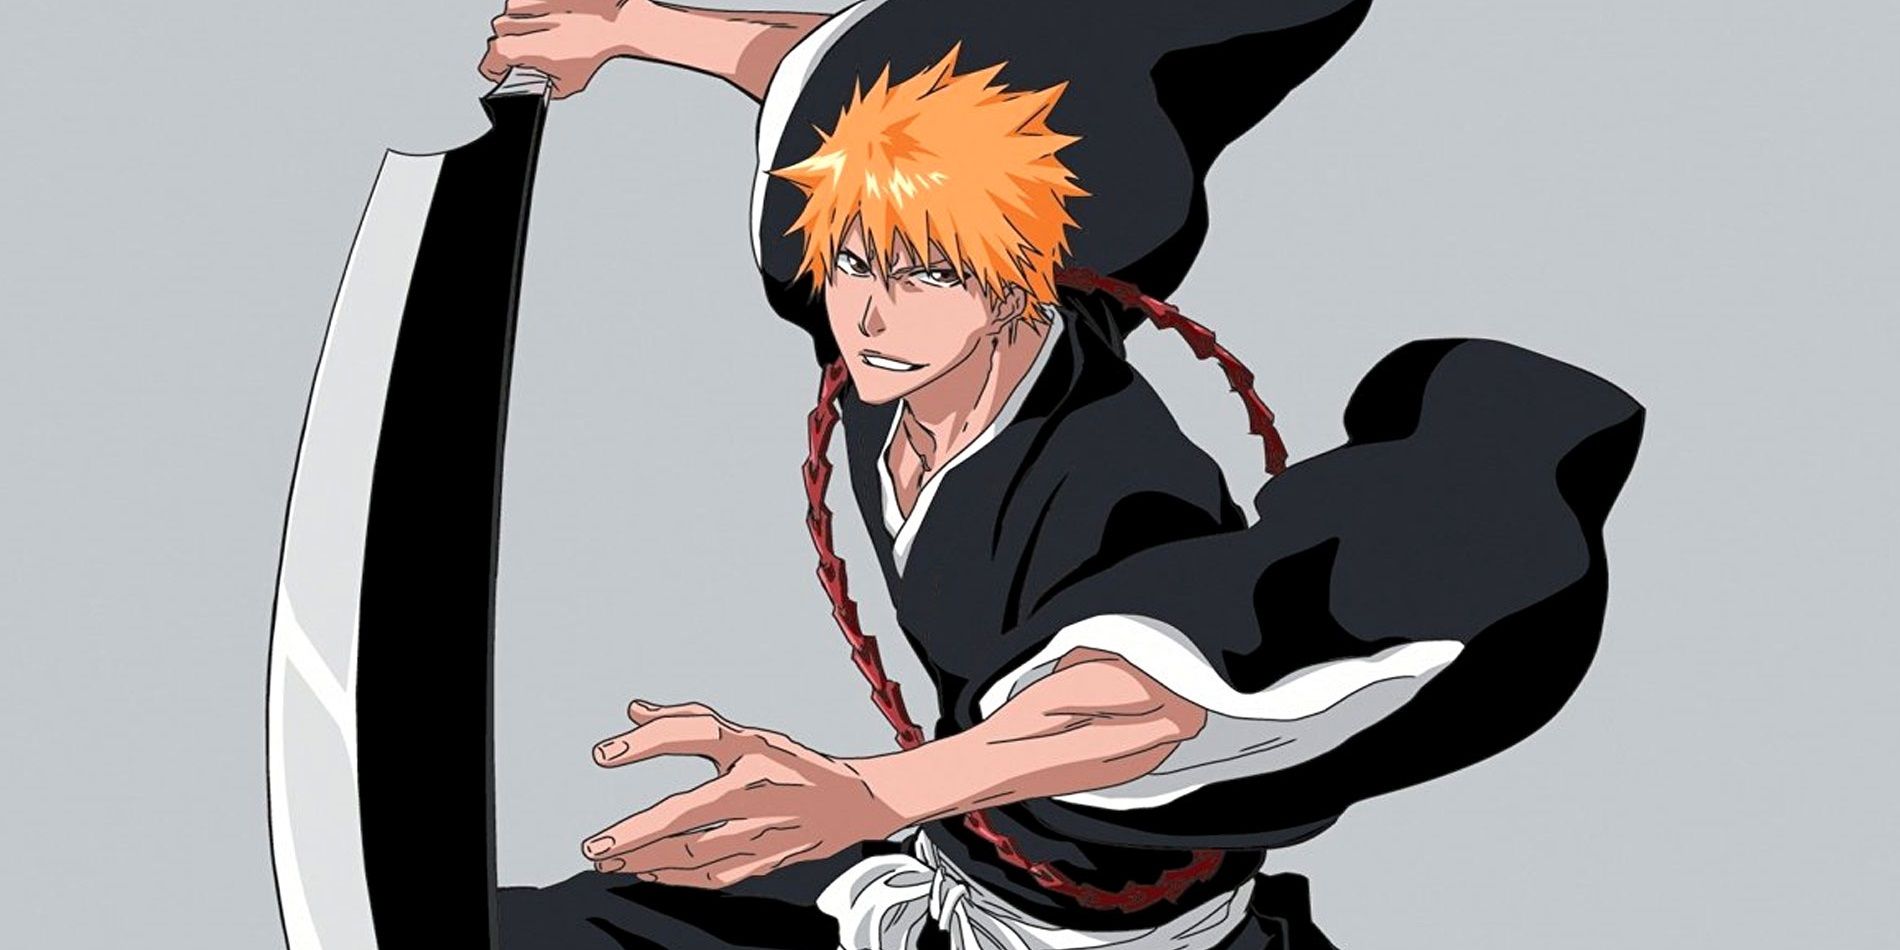 Are you excited for the return of Bleach after an 8-year hiatus? - Quora